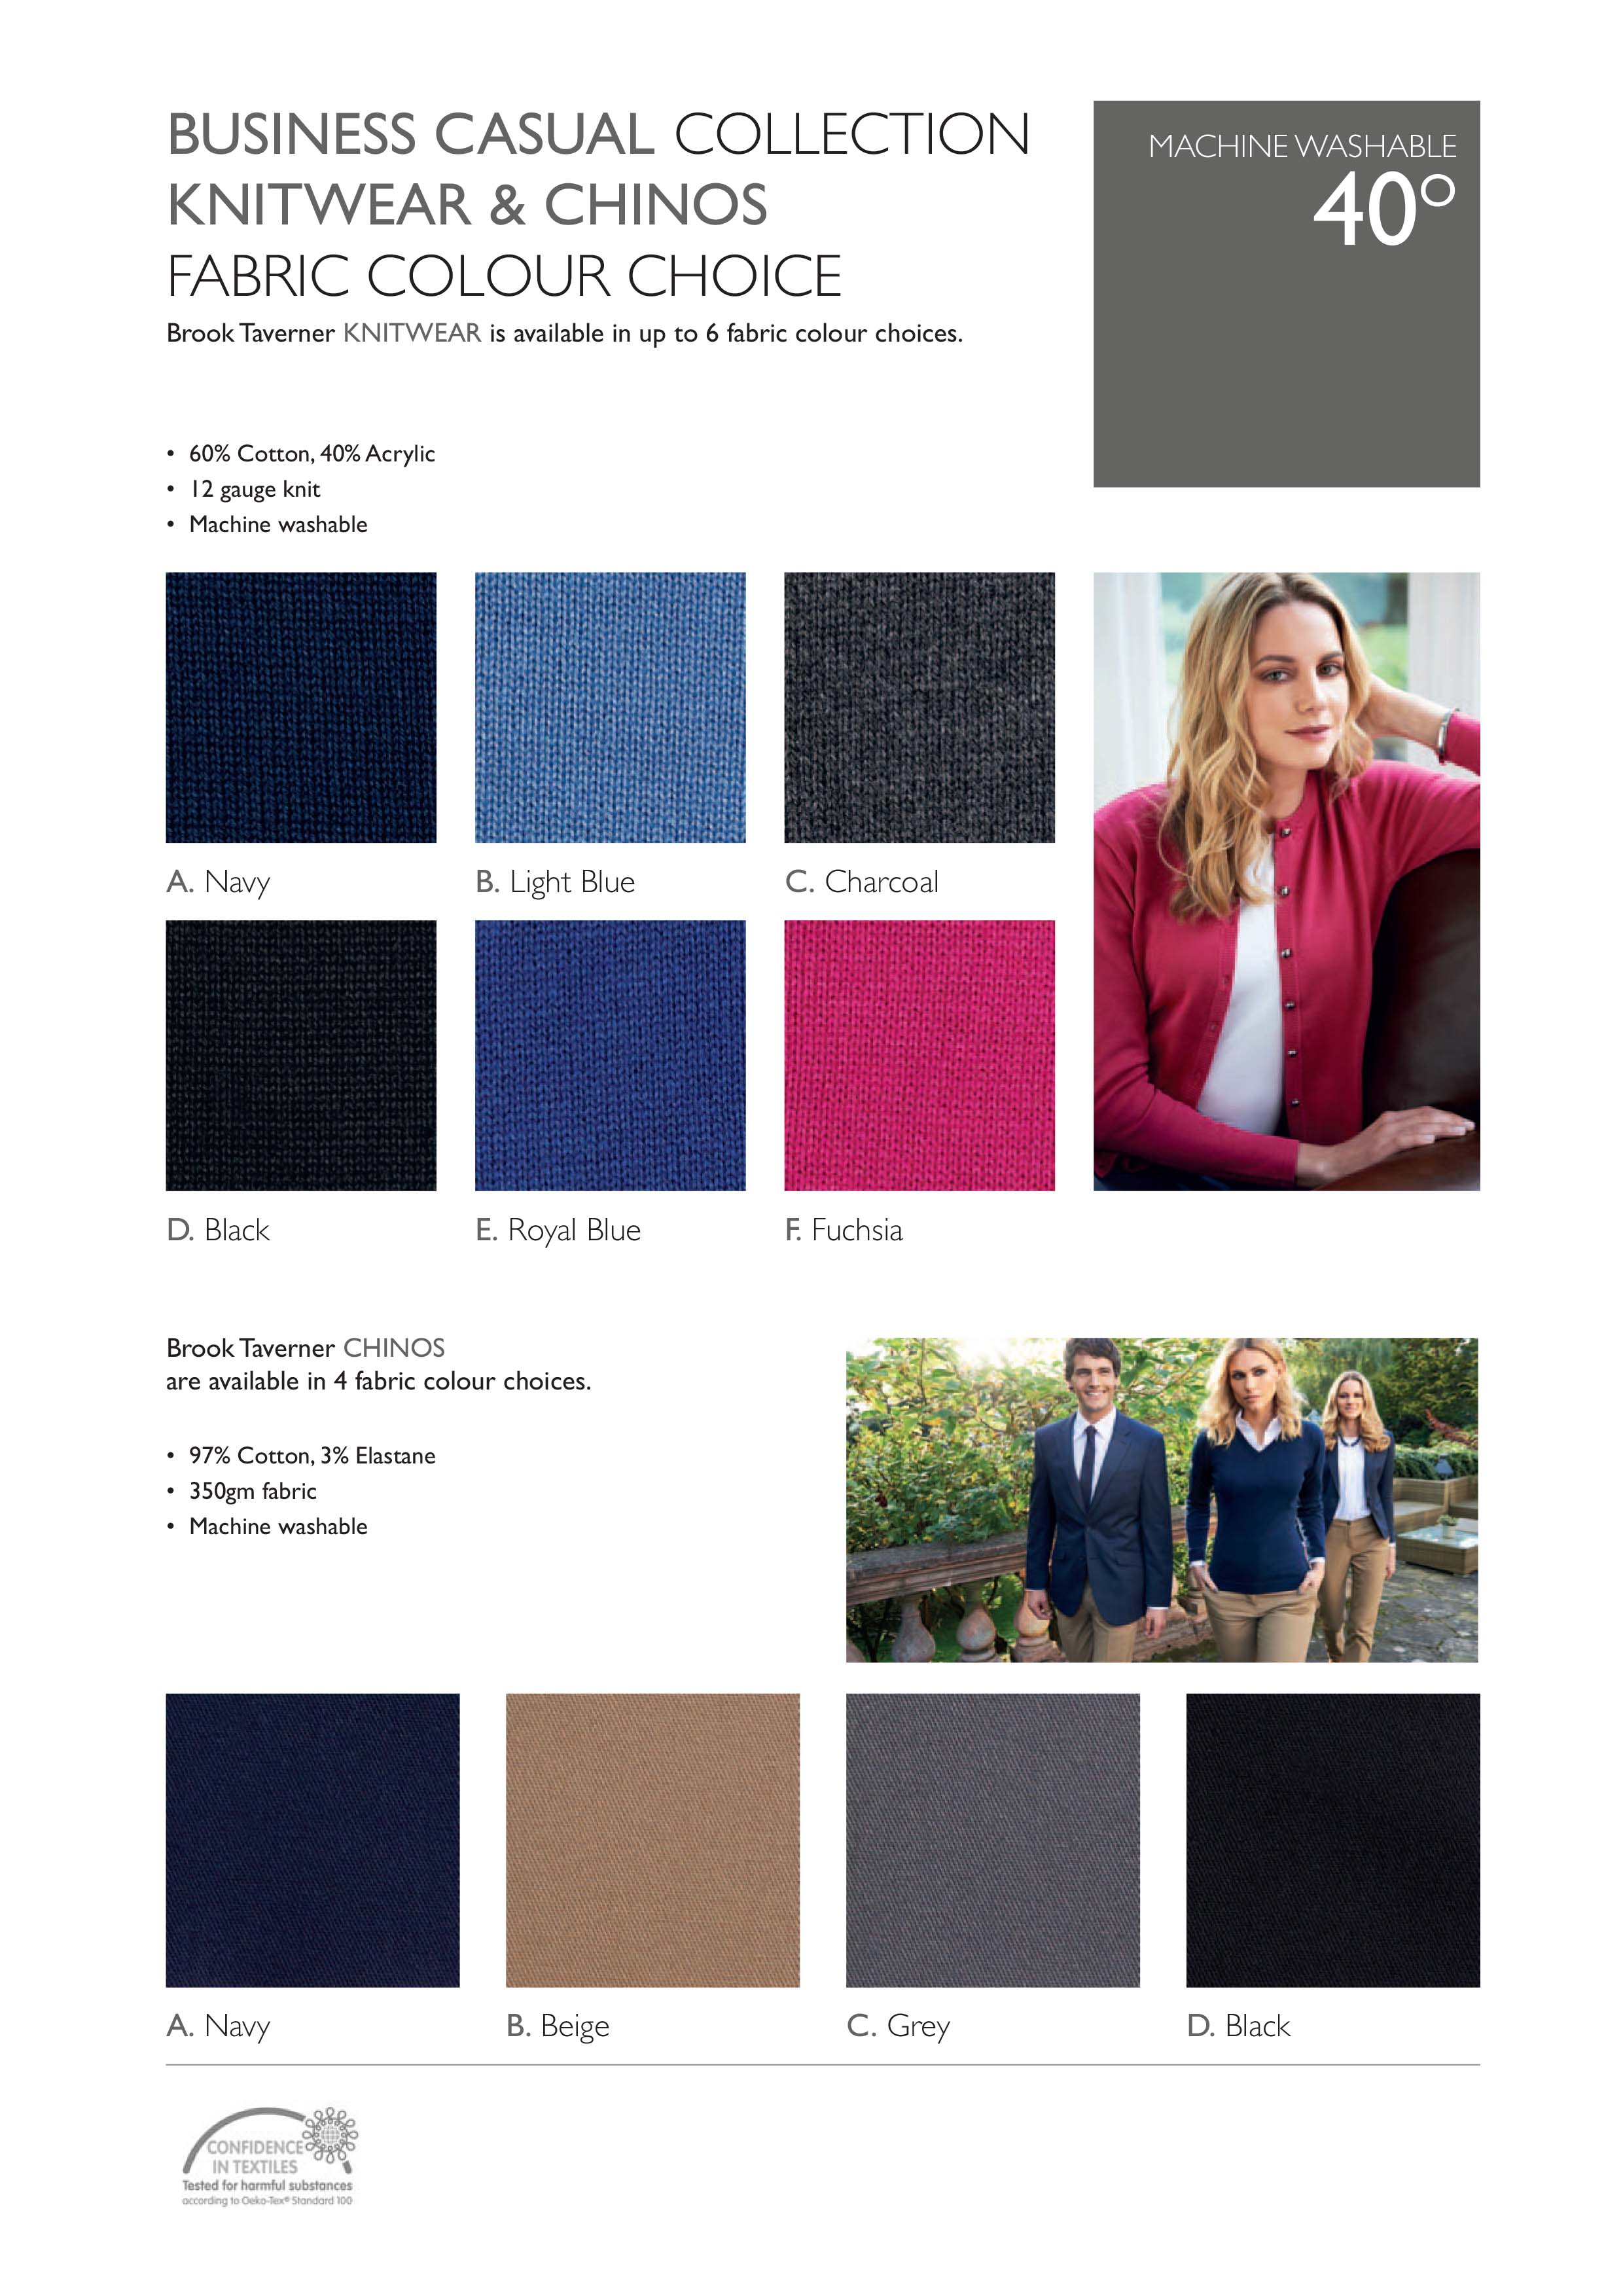 BROOK TAVERNER BUSINESS CASUAL FABRICS AND COLOURS